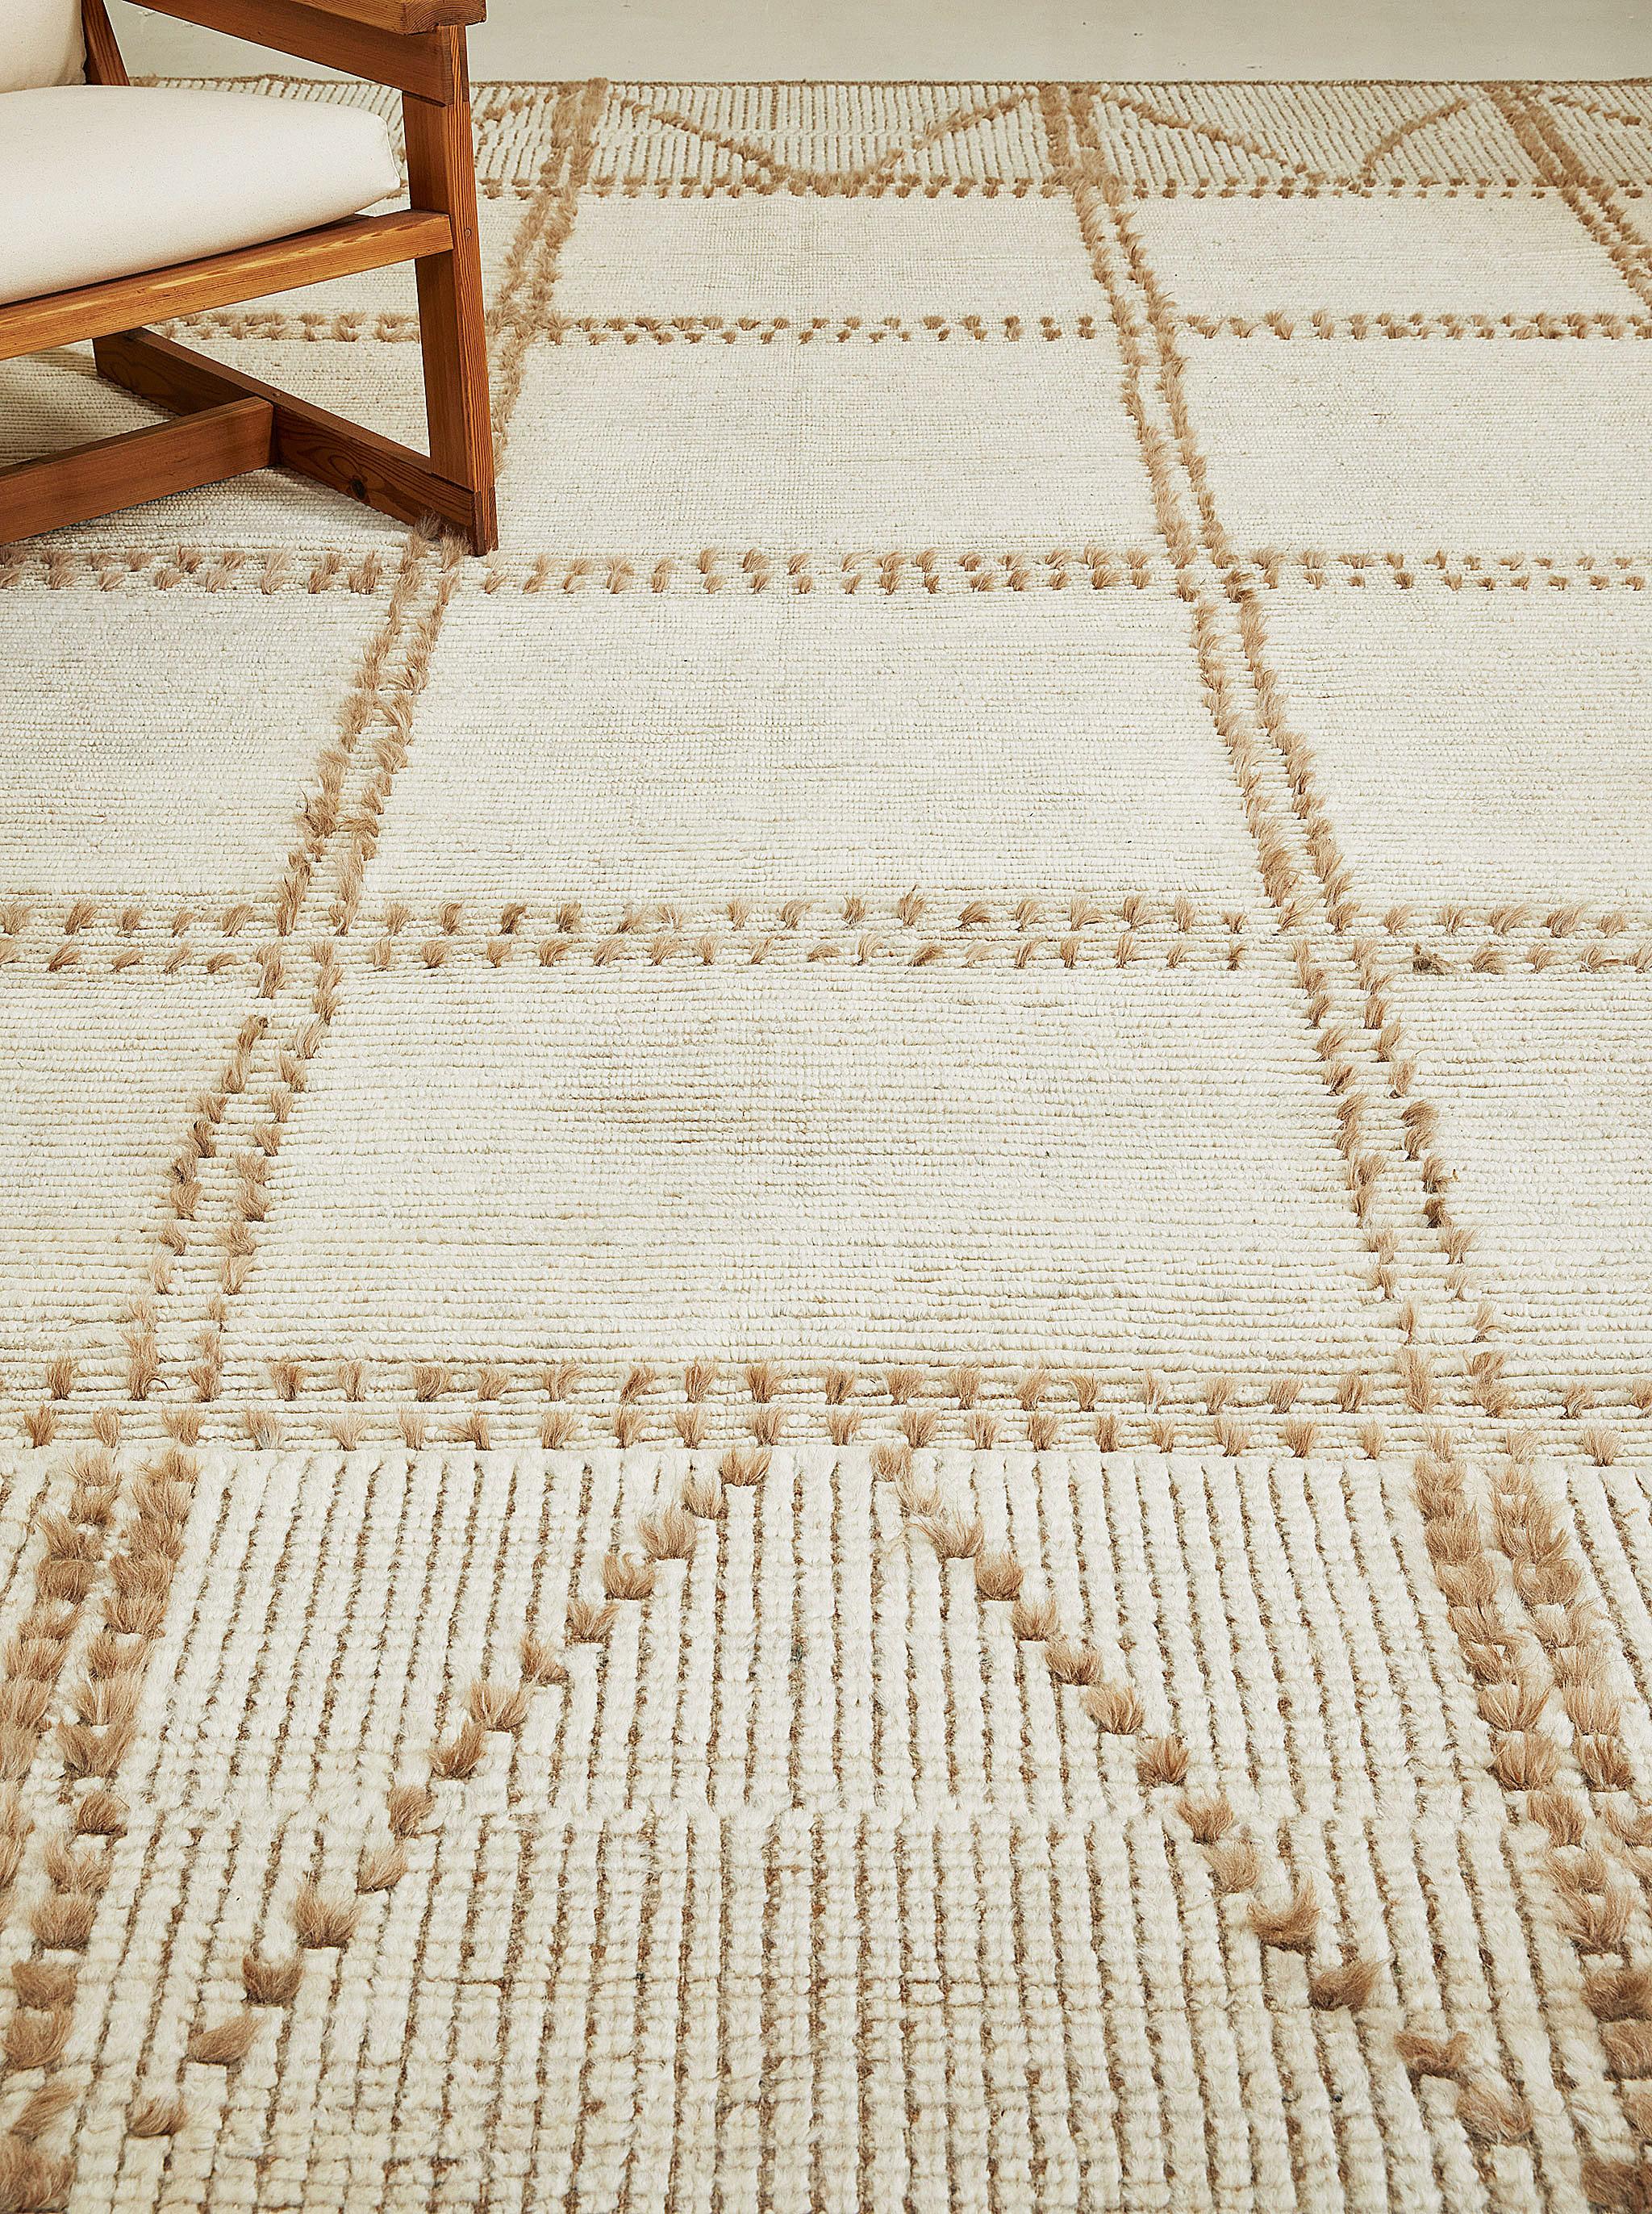 Valdepena’s long knots contrast with trim ribbed pile creating a harmony of texture and color. A linear motif finished in diagonal zags at top and bottom.

Here in clay: warm taupes in the flatweave are echoed in the long knot accents.

The Estancia